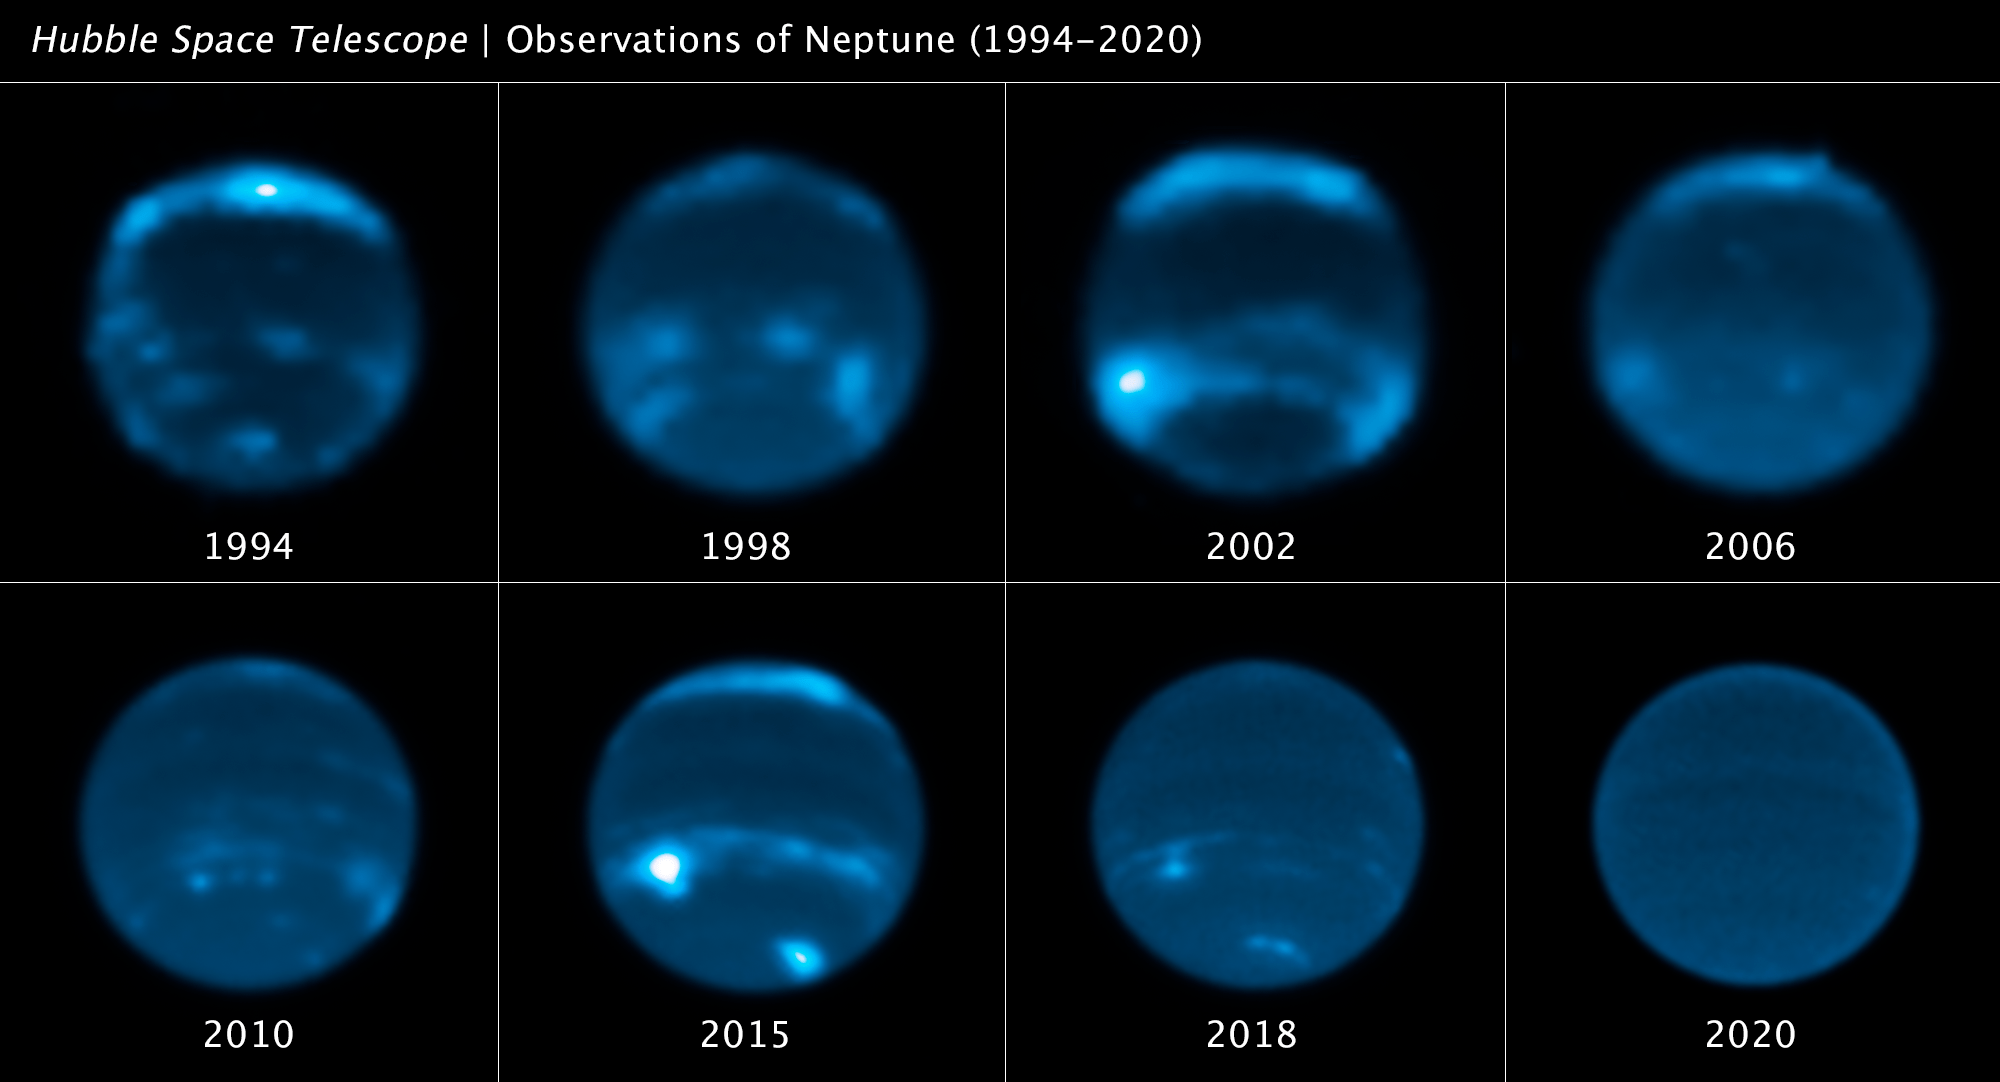 Neptune's Disappearing Clouds Linked to the Solar Cycle